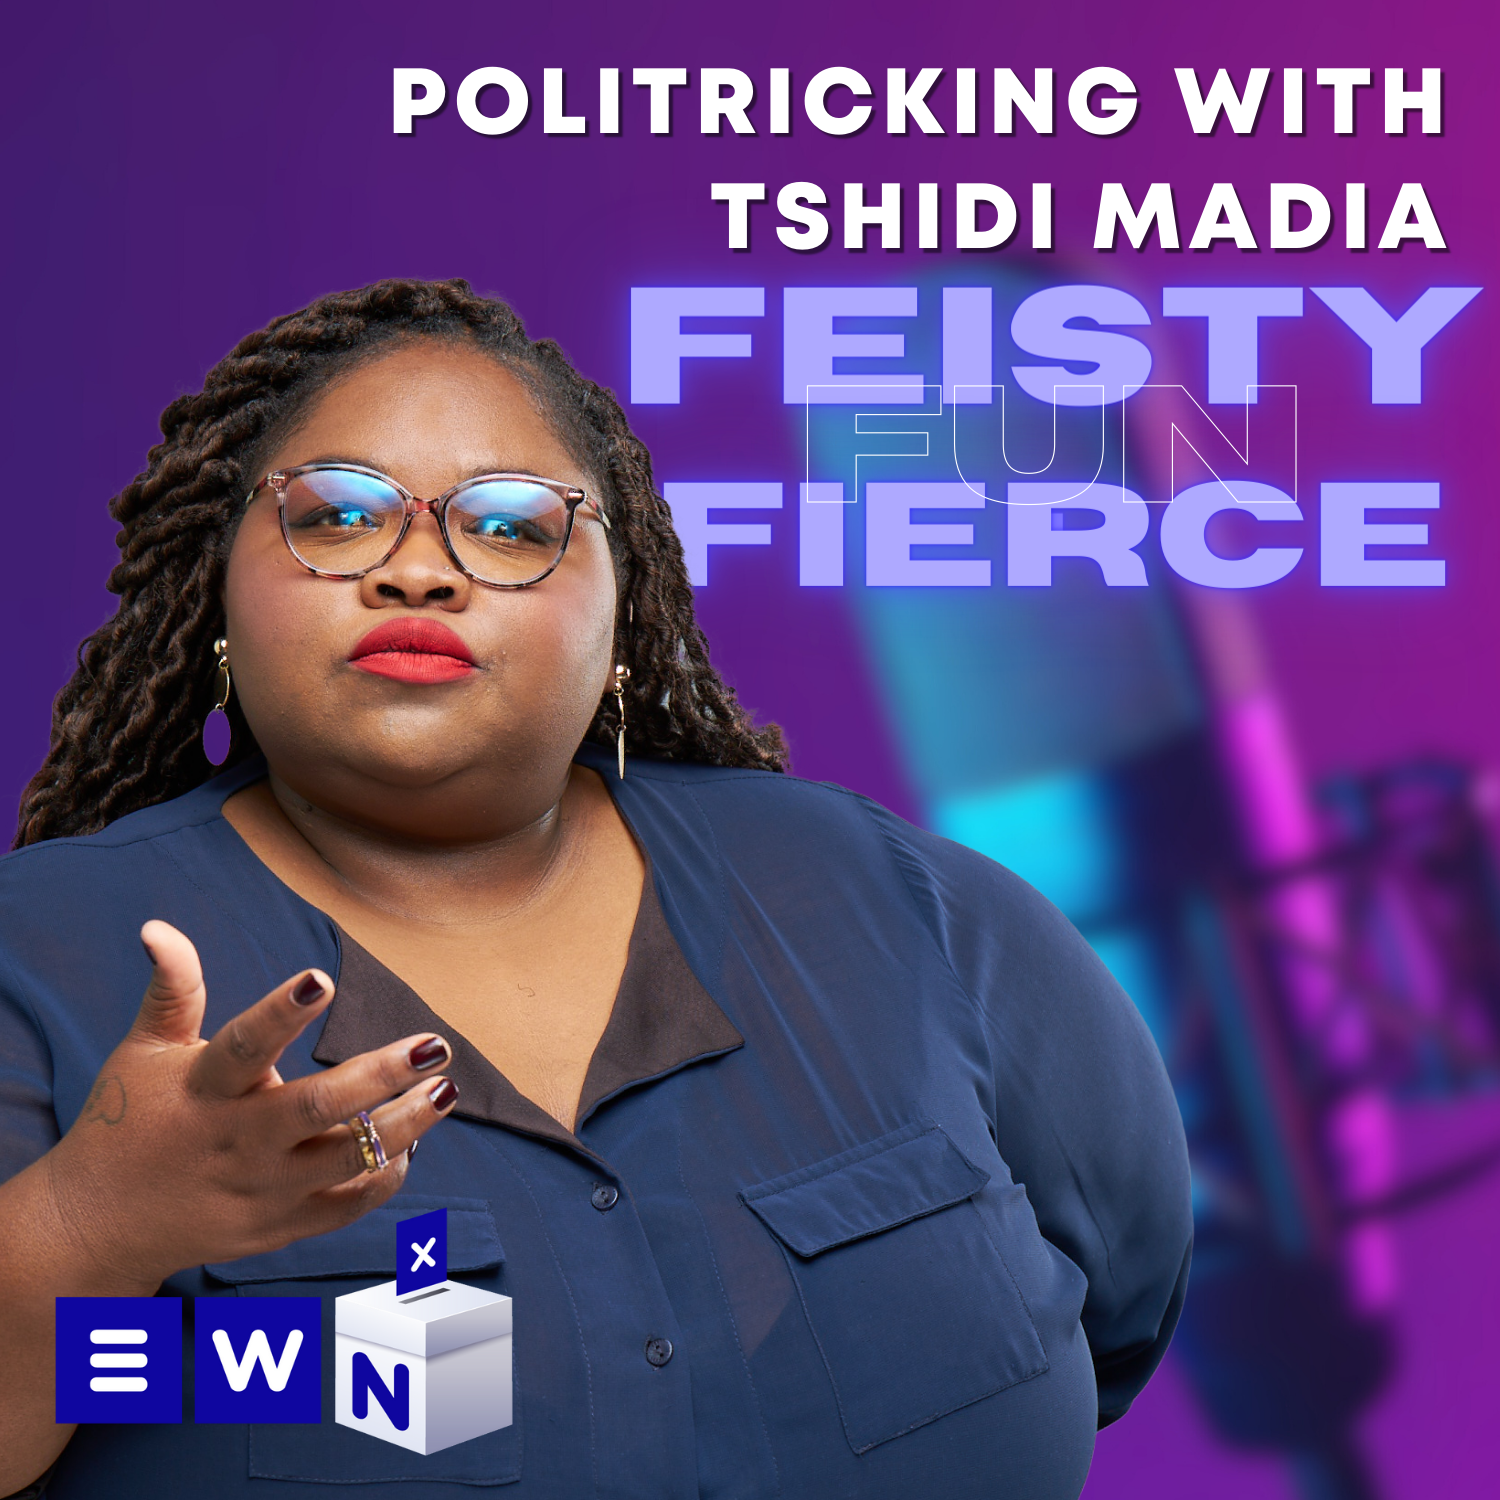 Politricking with Tshidi Madia: GOOD Party Leader, Patricia de Lille